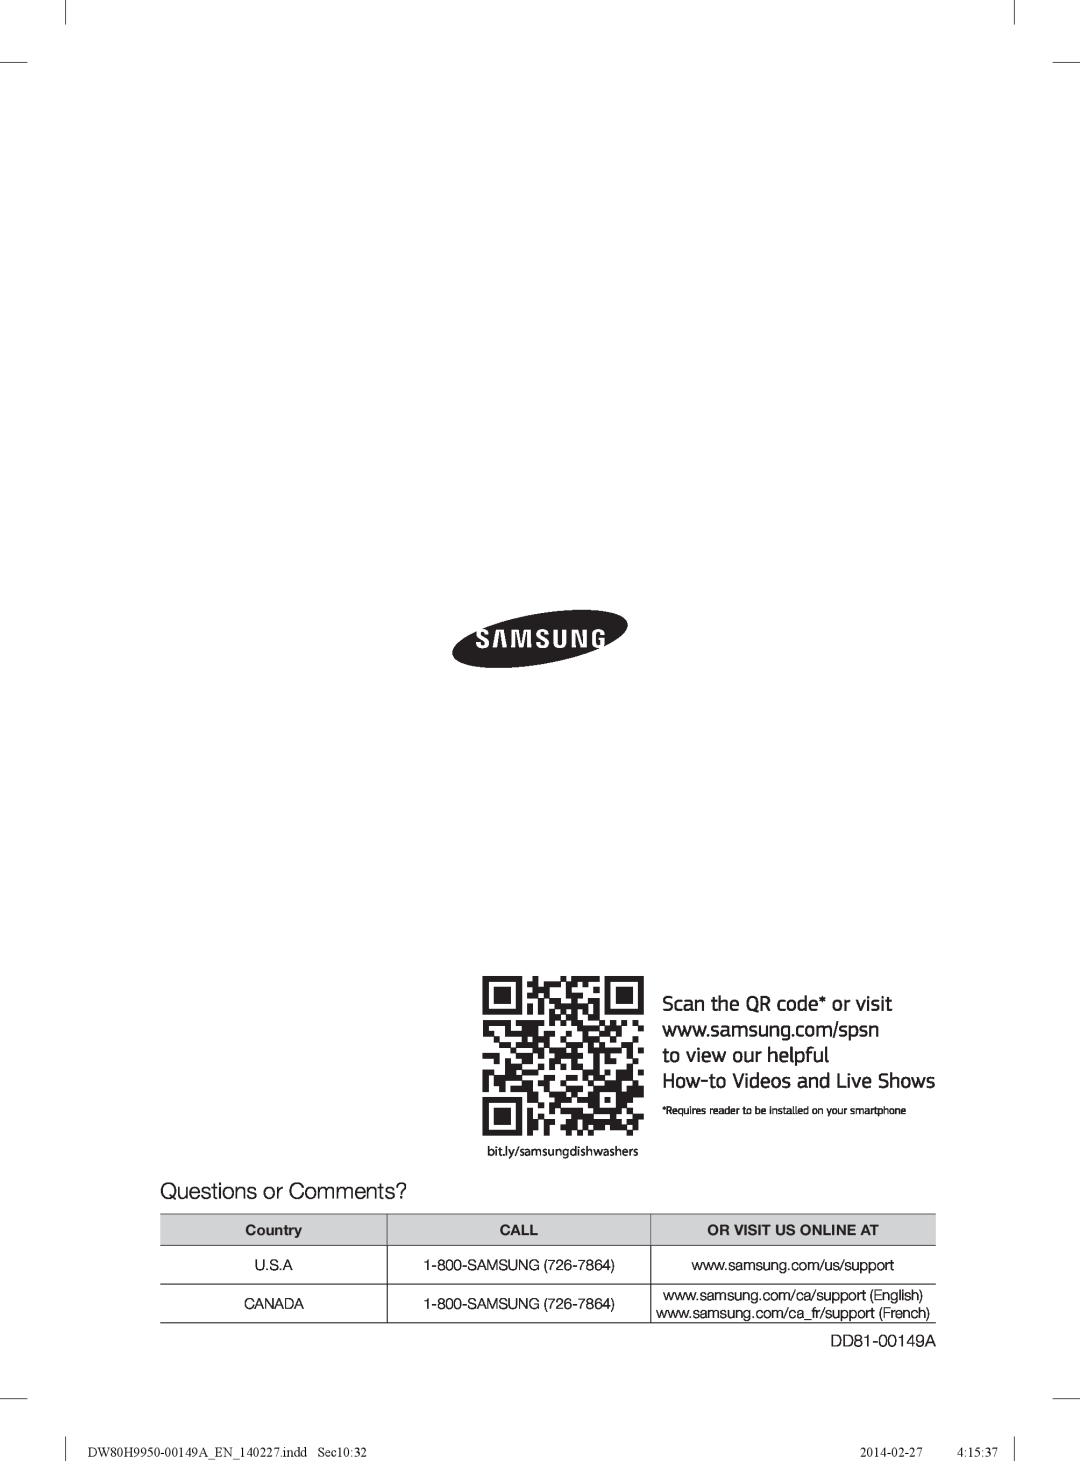 Samsung DW80H9930US Questions or Comments?, Country, Call, Or Visit Us Online At, bit.ly/samsungdishwashers, 2014-02-27 